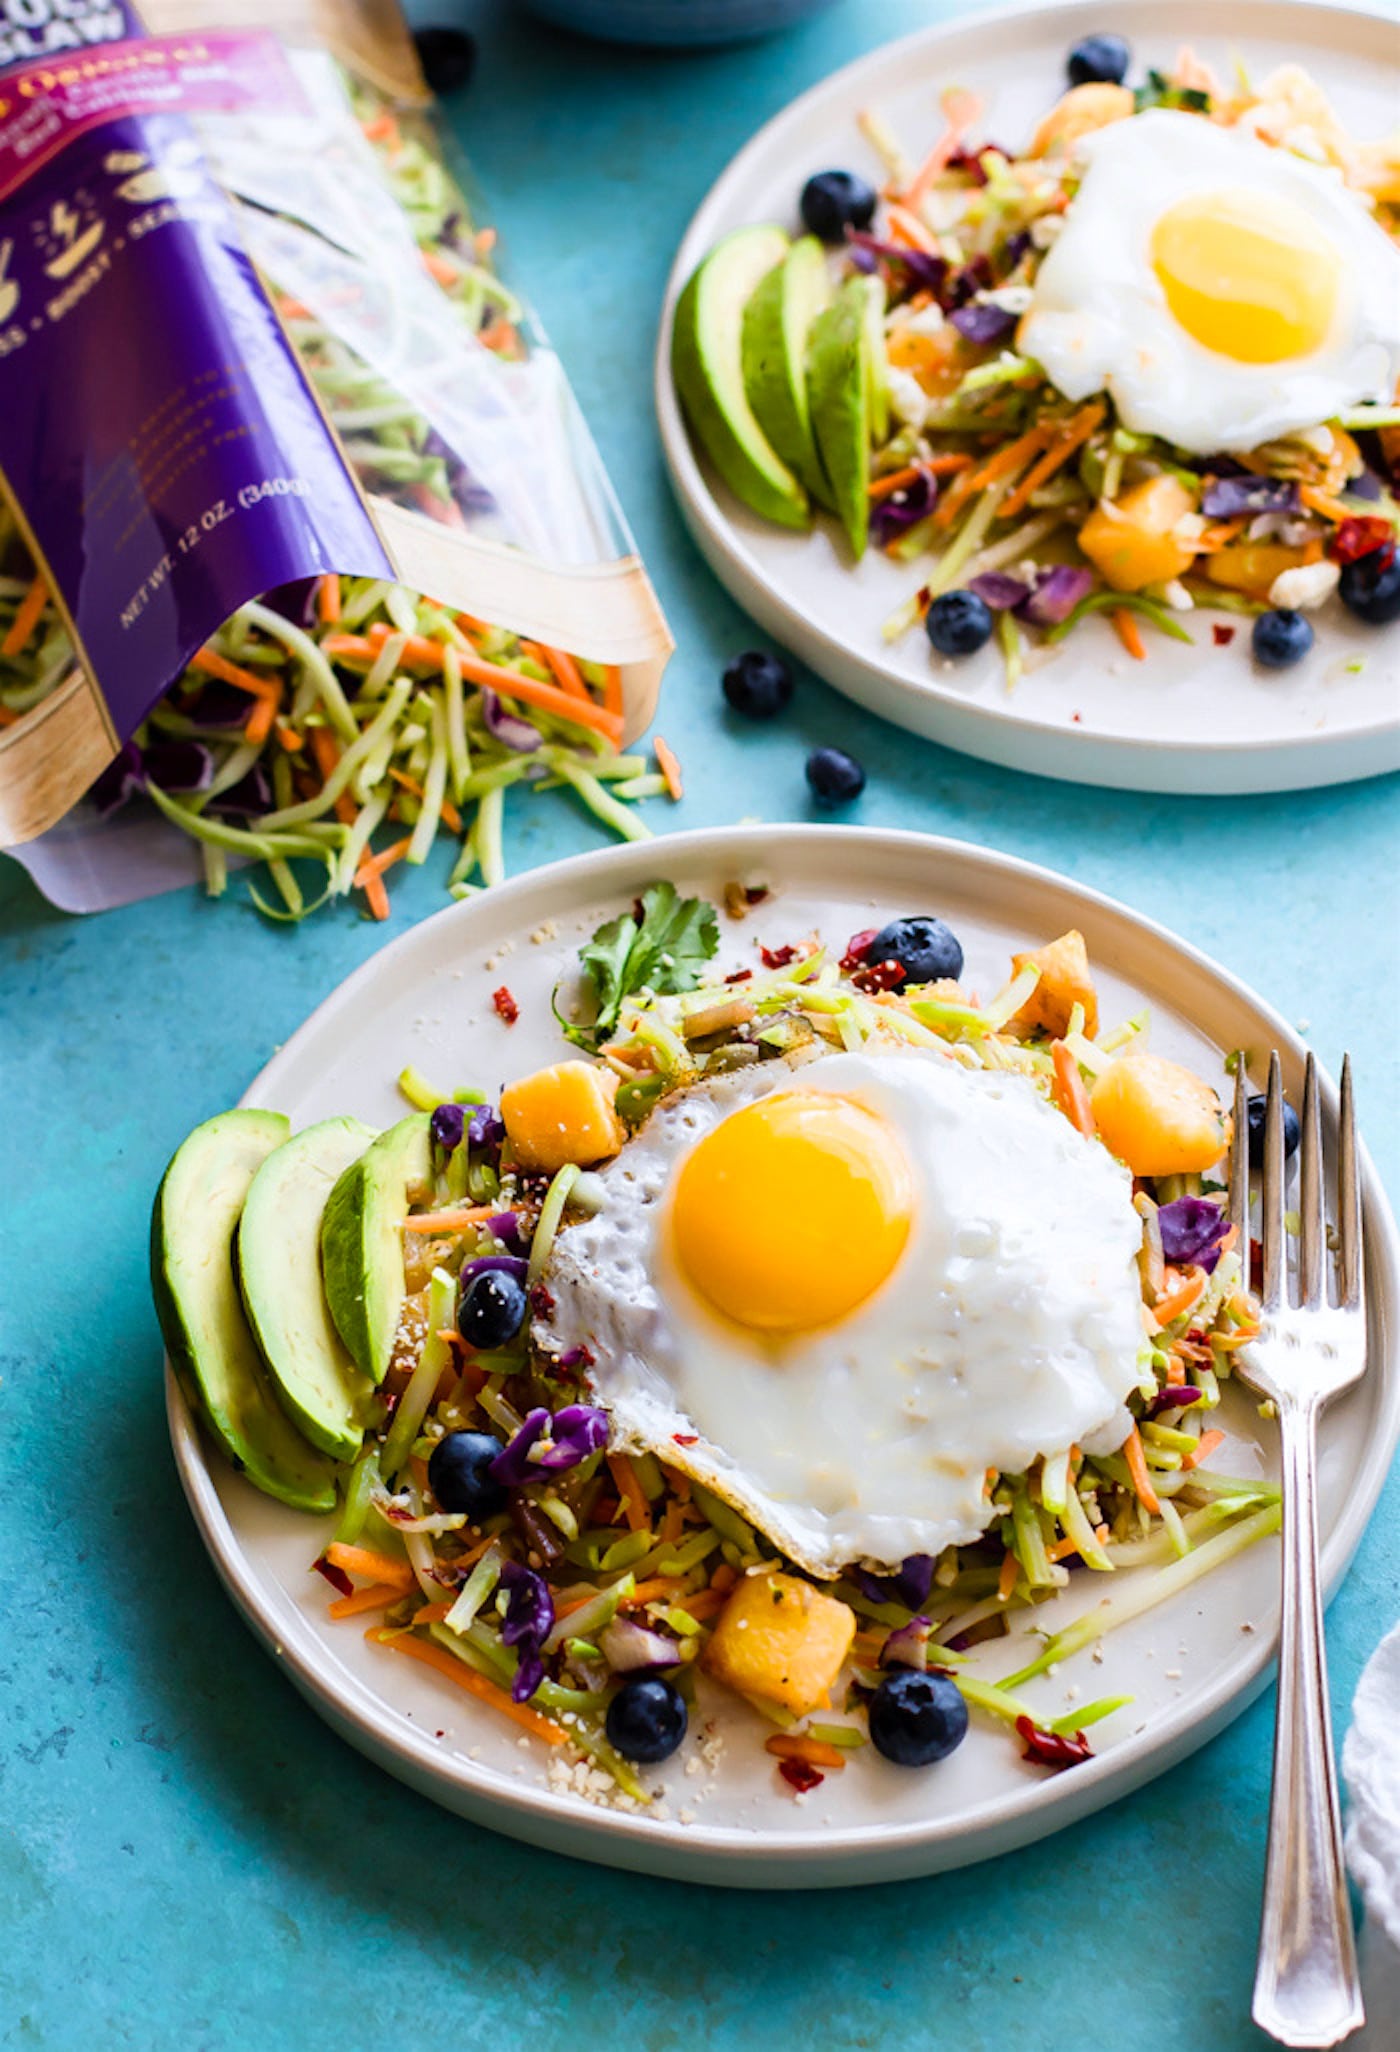 Breakfast salads are the best way to start the day! Create a healthy warm Paleo morning meal with lightly cooked broccoli cole slaw, onion, and squash topped with seasonal fruit and a protein rich fried egg! A nourishing breakfast salad worth waking up for! Easy, delicious, nutritious!